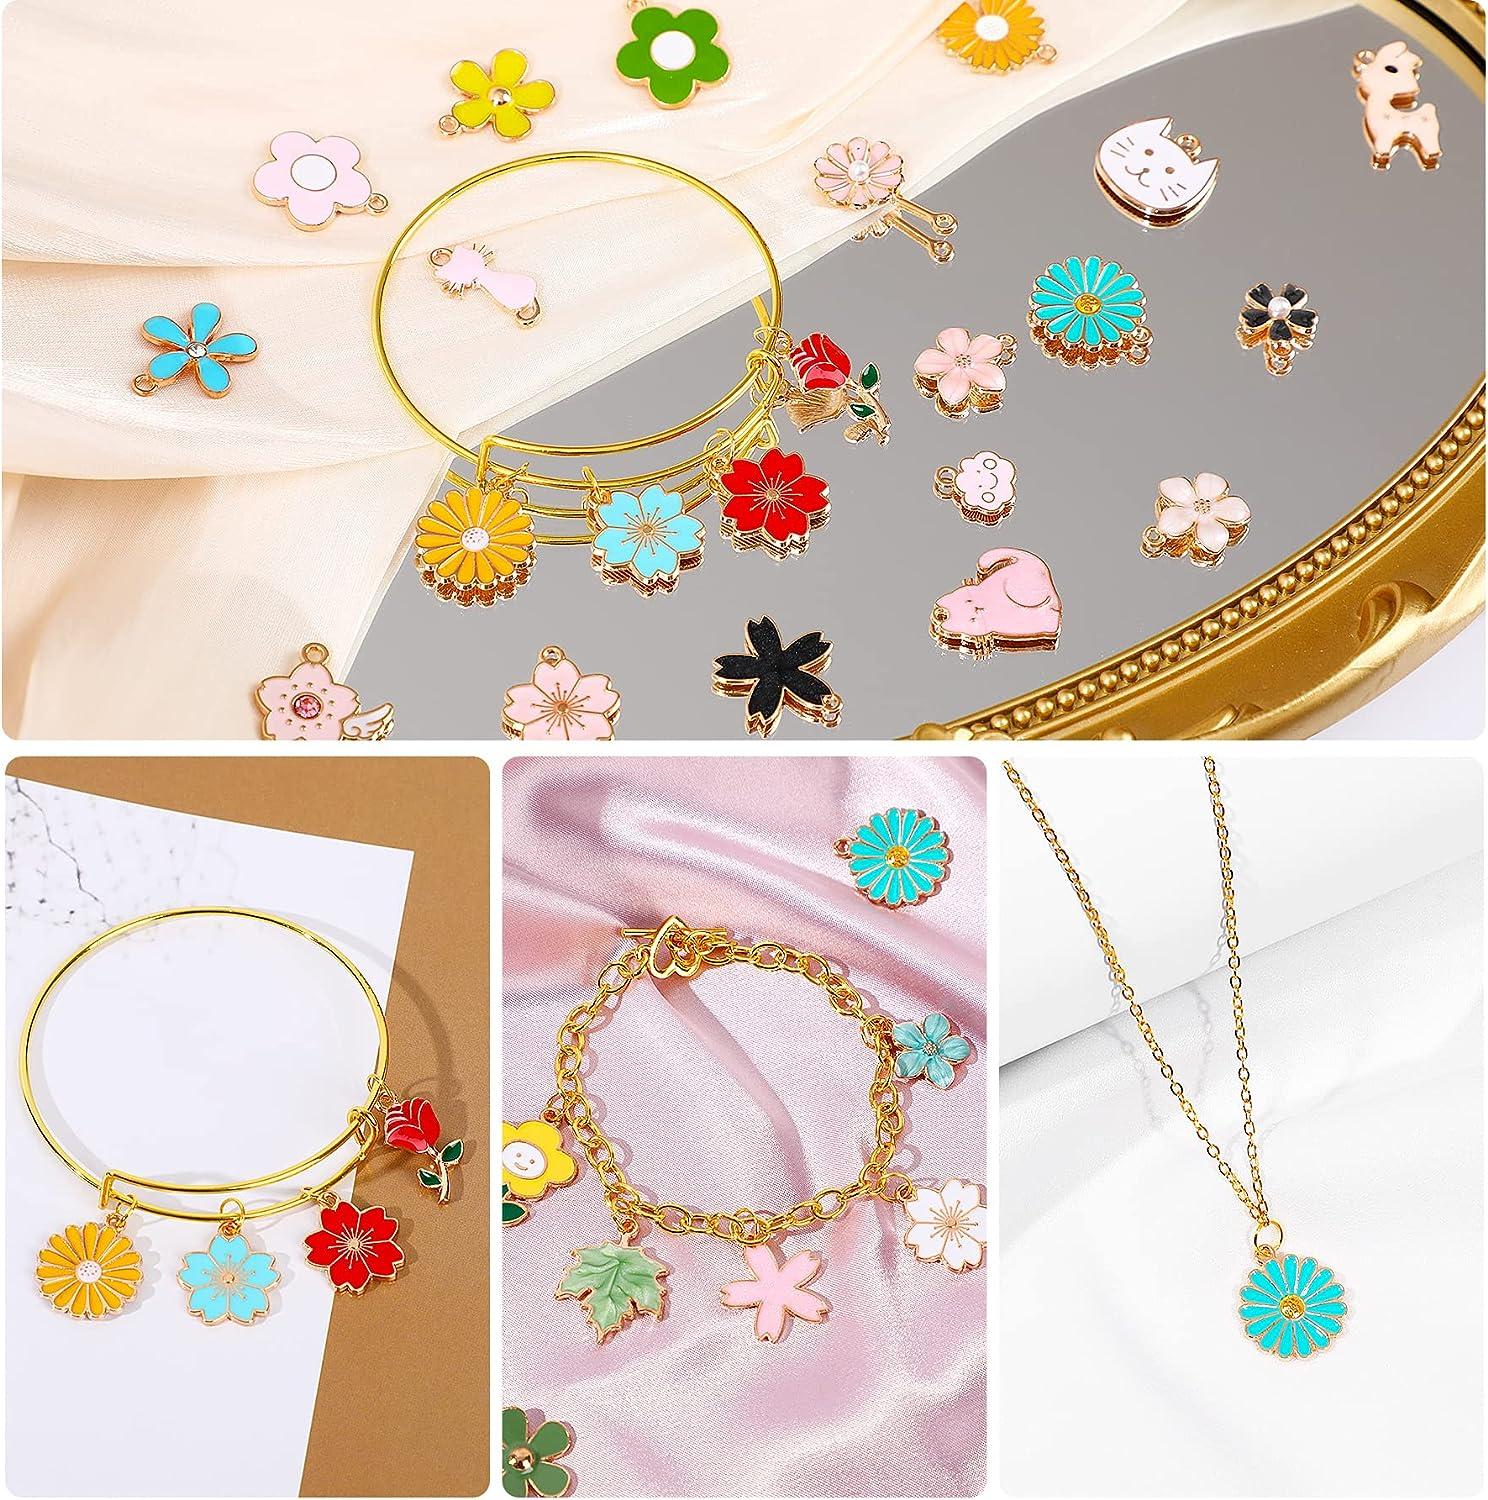 MARFOREVER 120 Pcs Spring Floral Themed Flower Charms for Jewelry Making  Assorted Gold Enamel Charm Pendants for DIY Necklace Bracelet Earrings  Making Supplies Gifts for Mom